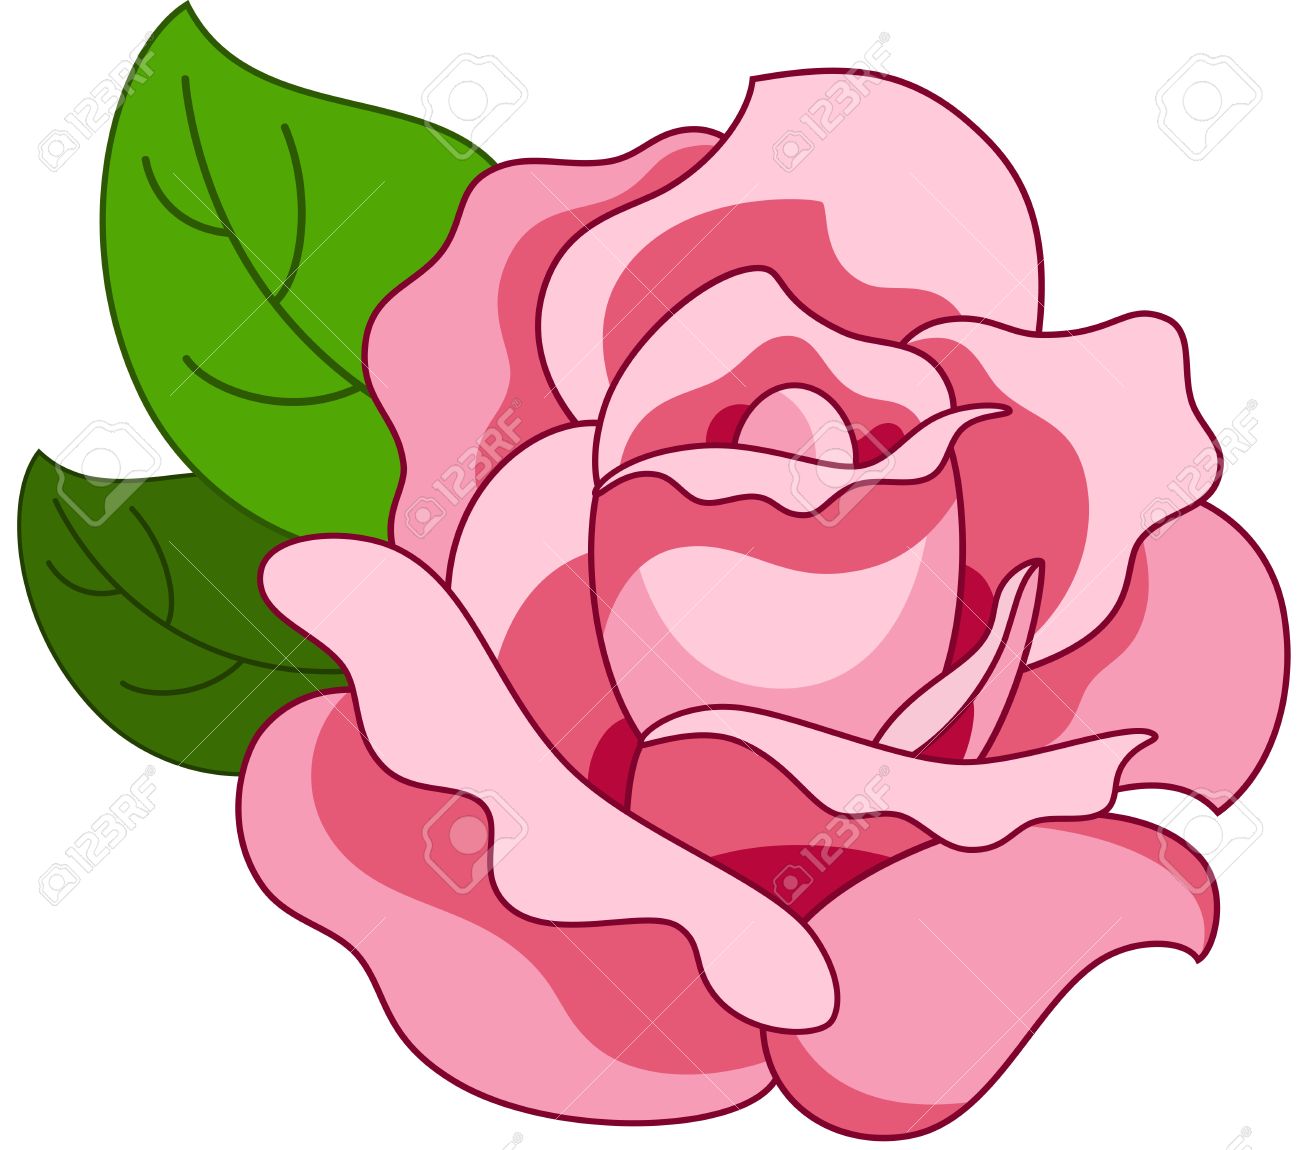 Cartoon Roses Pictures | Free download on ClipArtMag